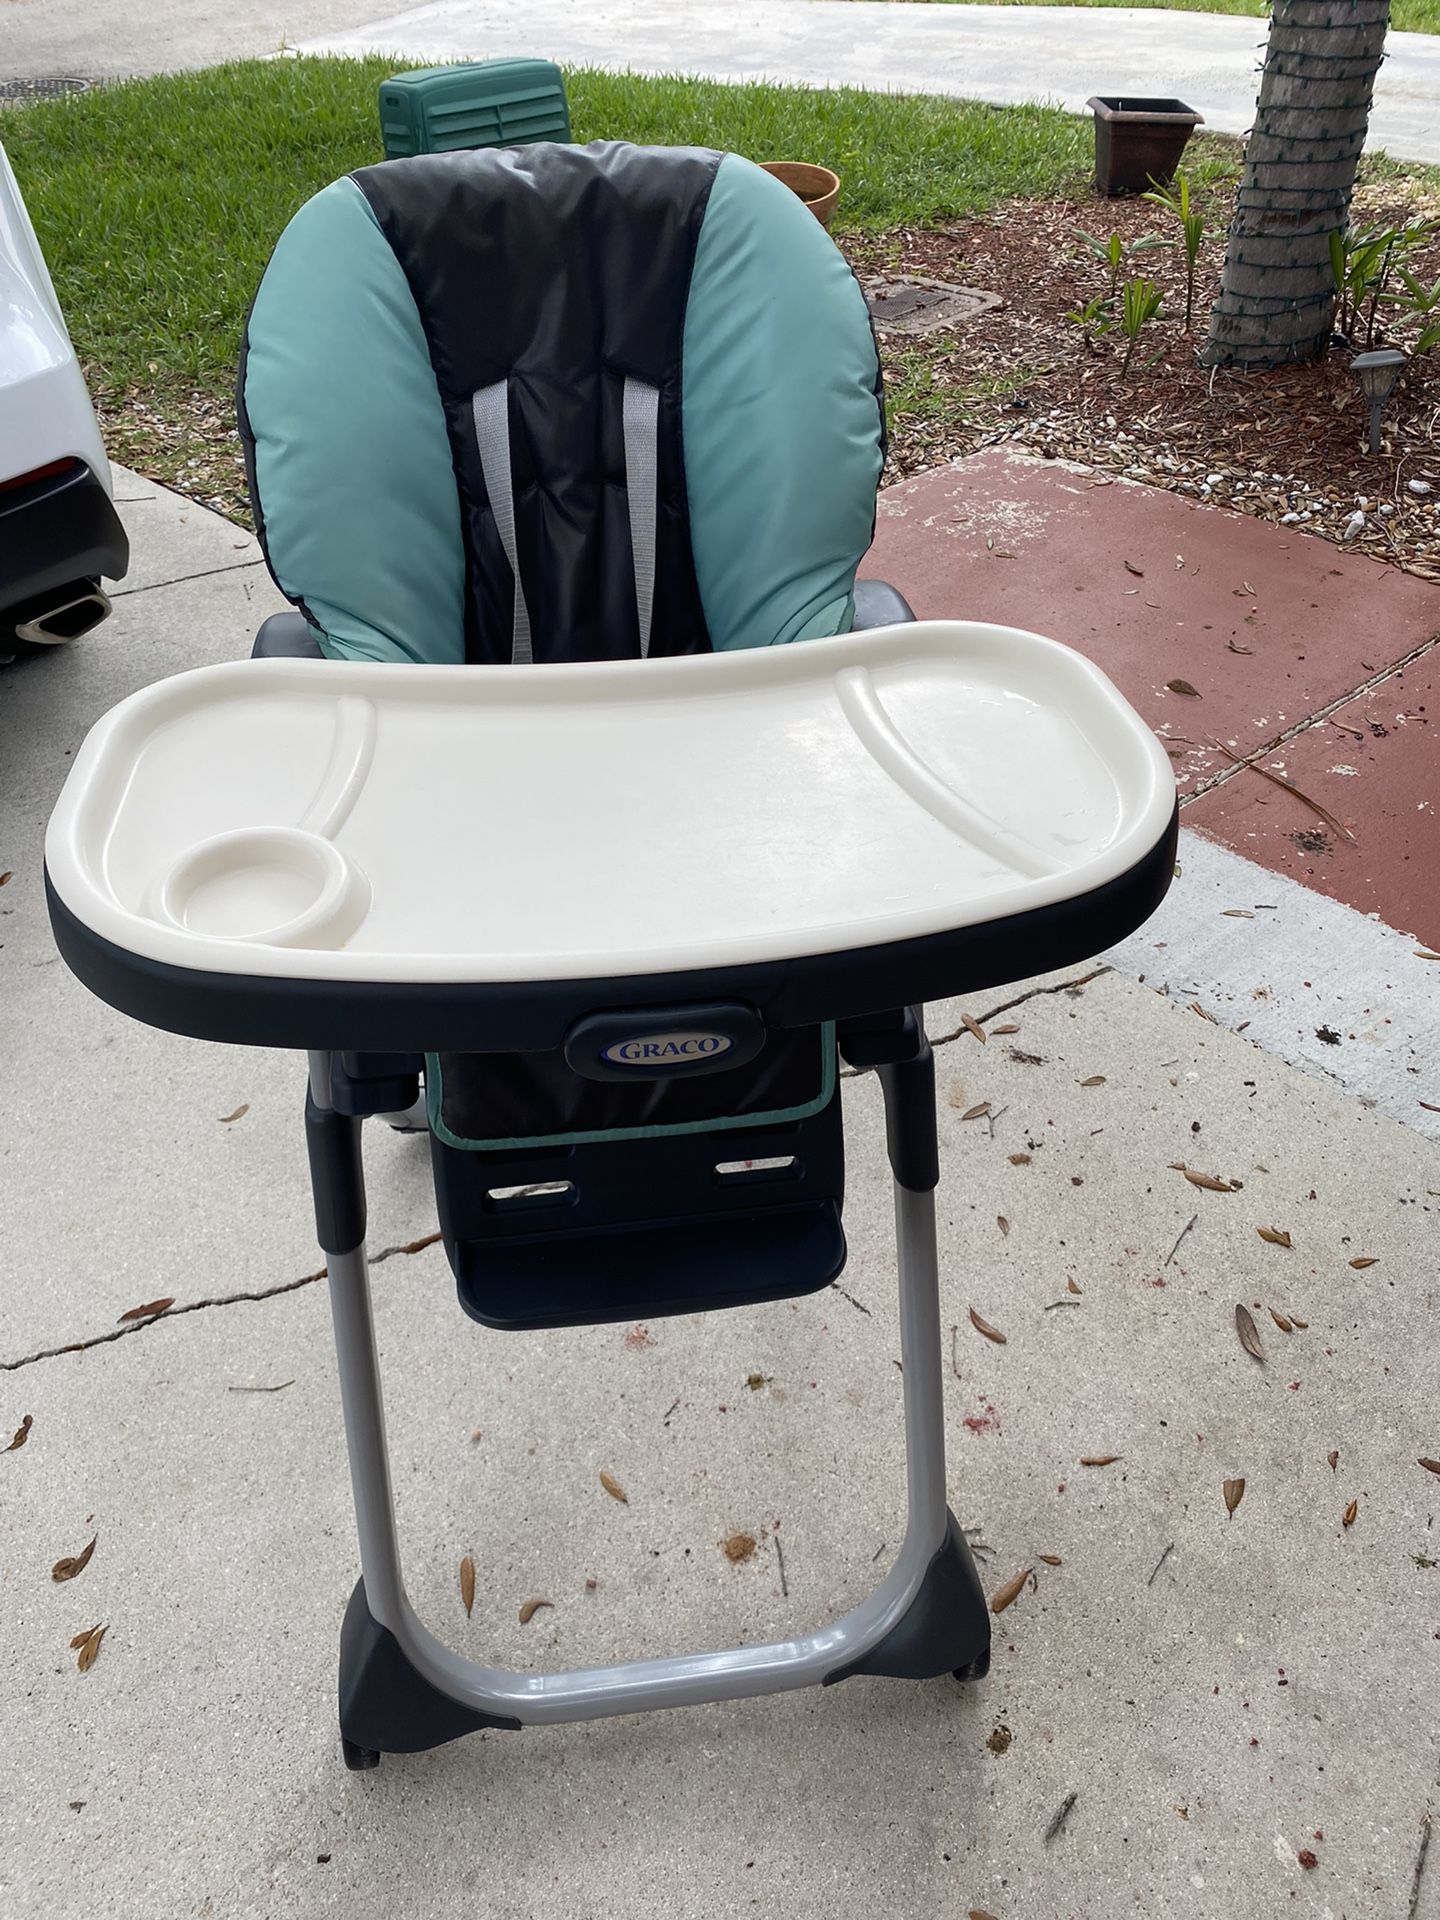 Graco DuoDiner High Chair - Great Condition 